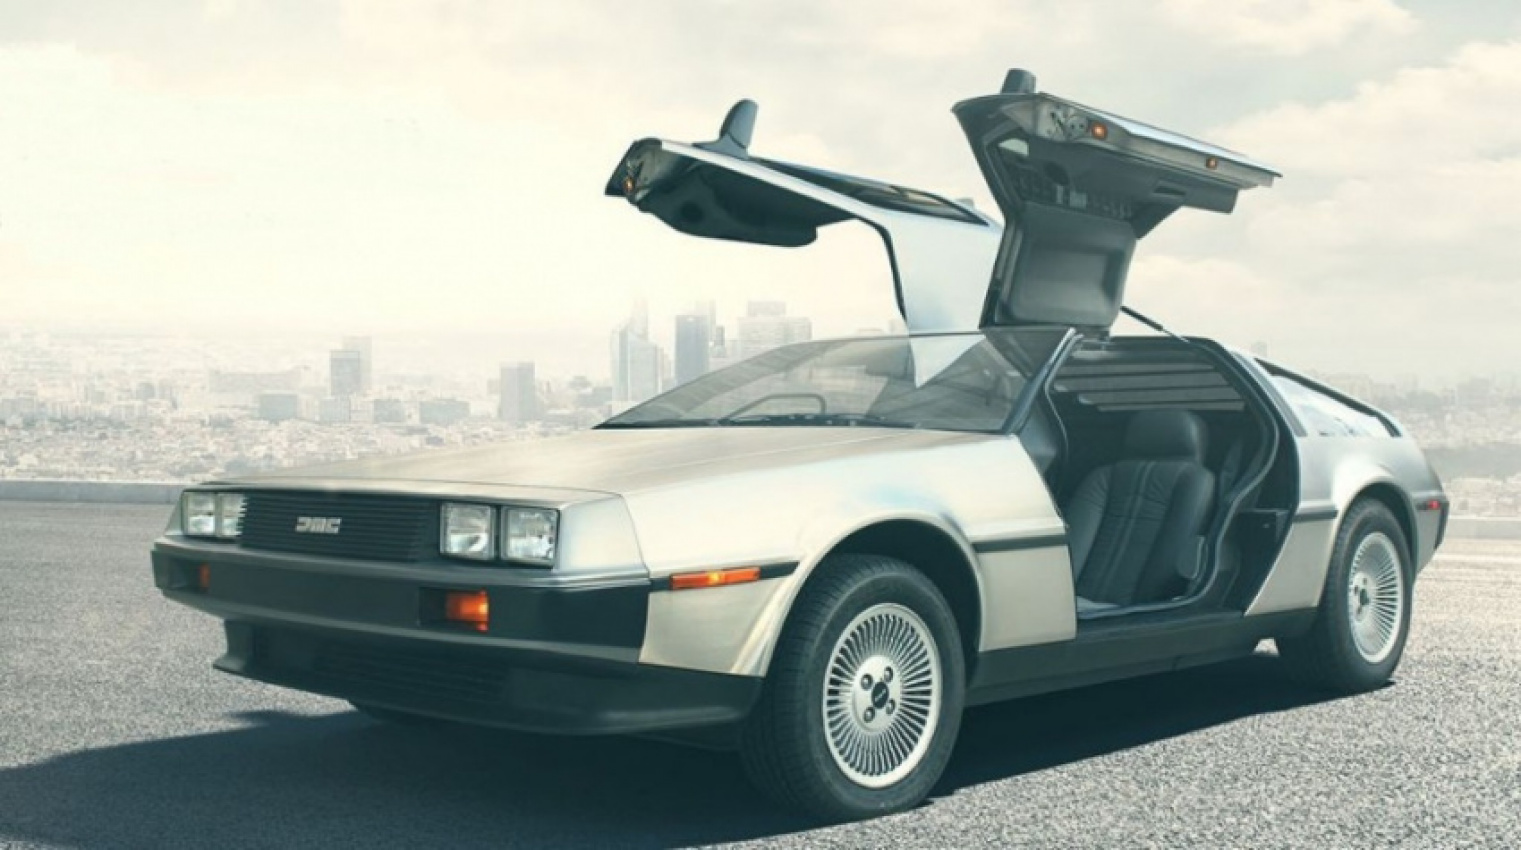 autos, cars, delorean, autos news, us firm taking orders for iconic delorean dmc-12 revival edition